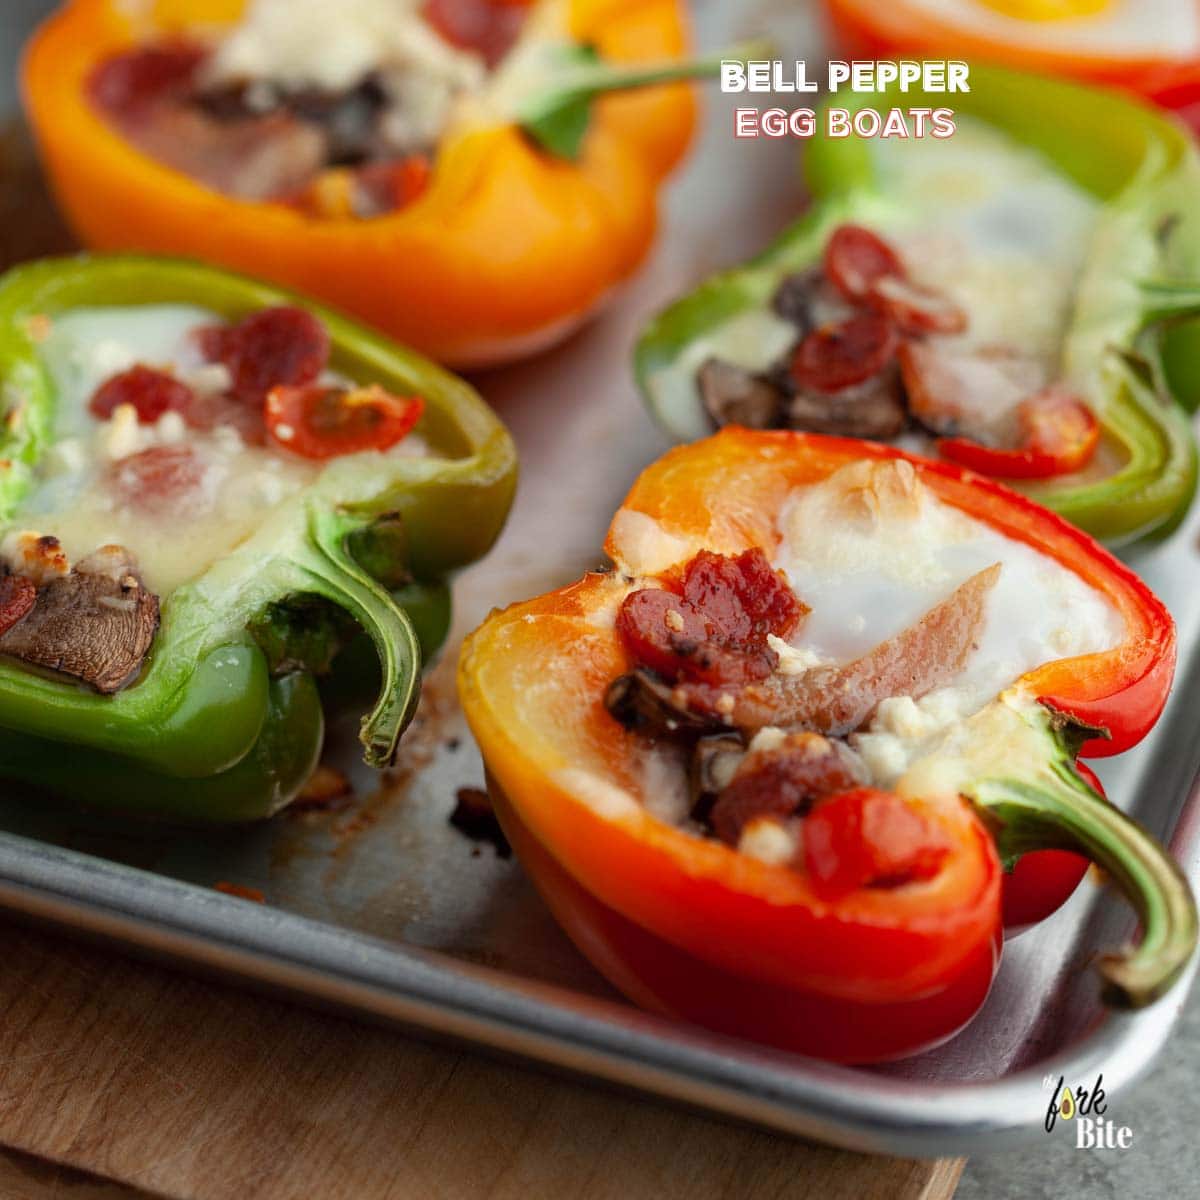 You can make these bell pepper egg boats for breakfast, brunch, luncheon, or even dinner. The boats are filling and no-sweat to make. For busy weeks, you can prepare it ahead for the rest of the week.